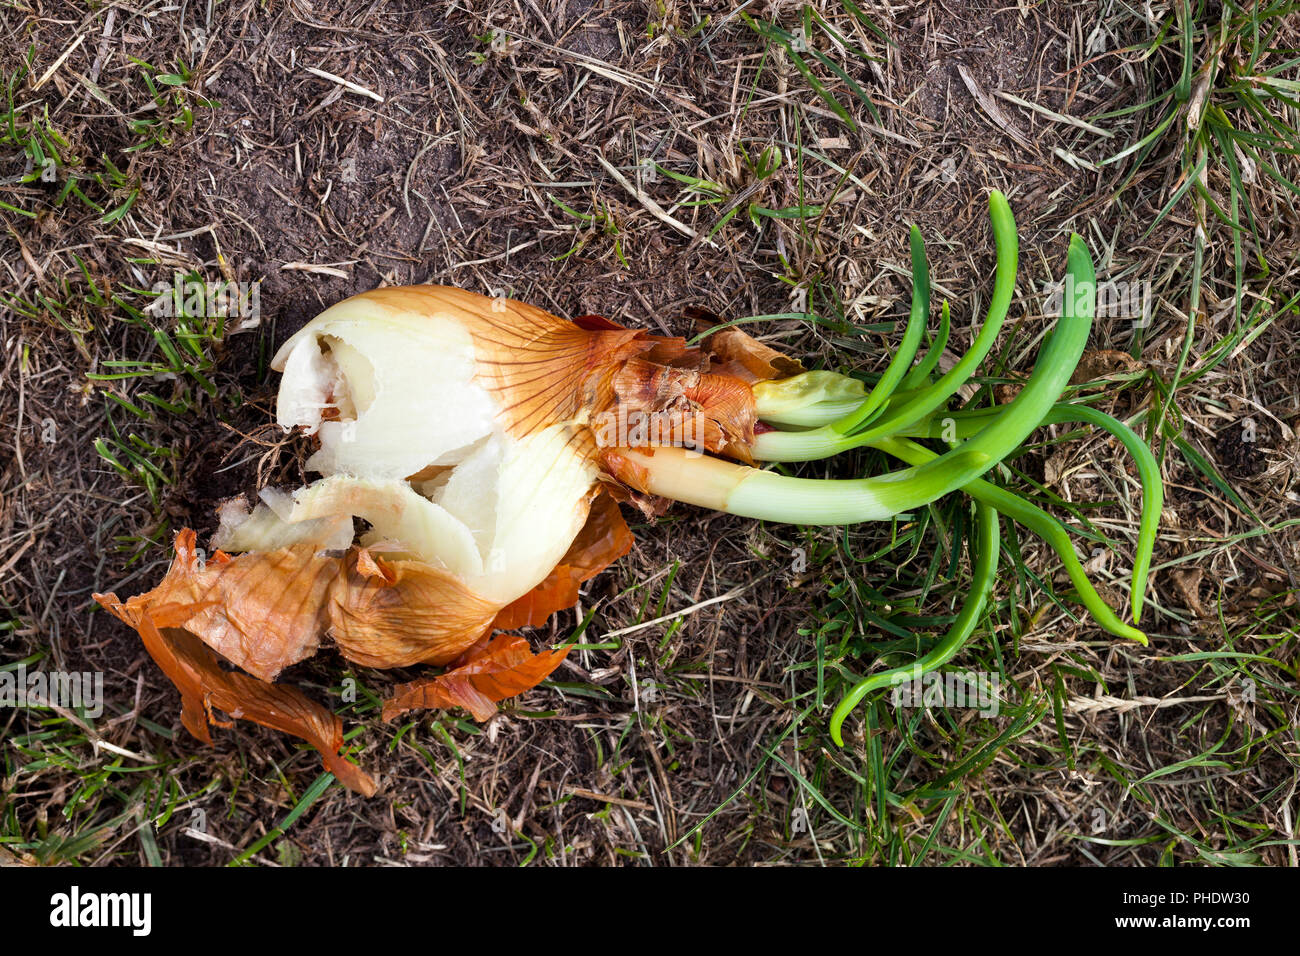 Sprouted orange onion and not planted in soil, closeup Stock Photo